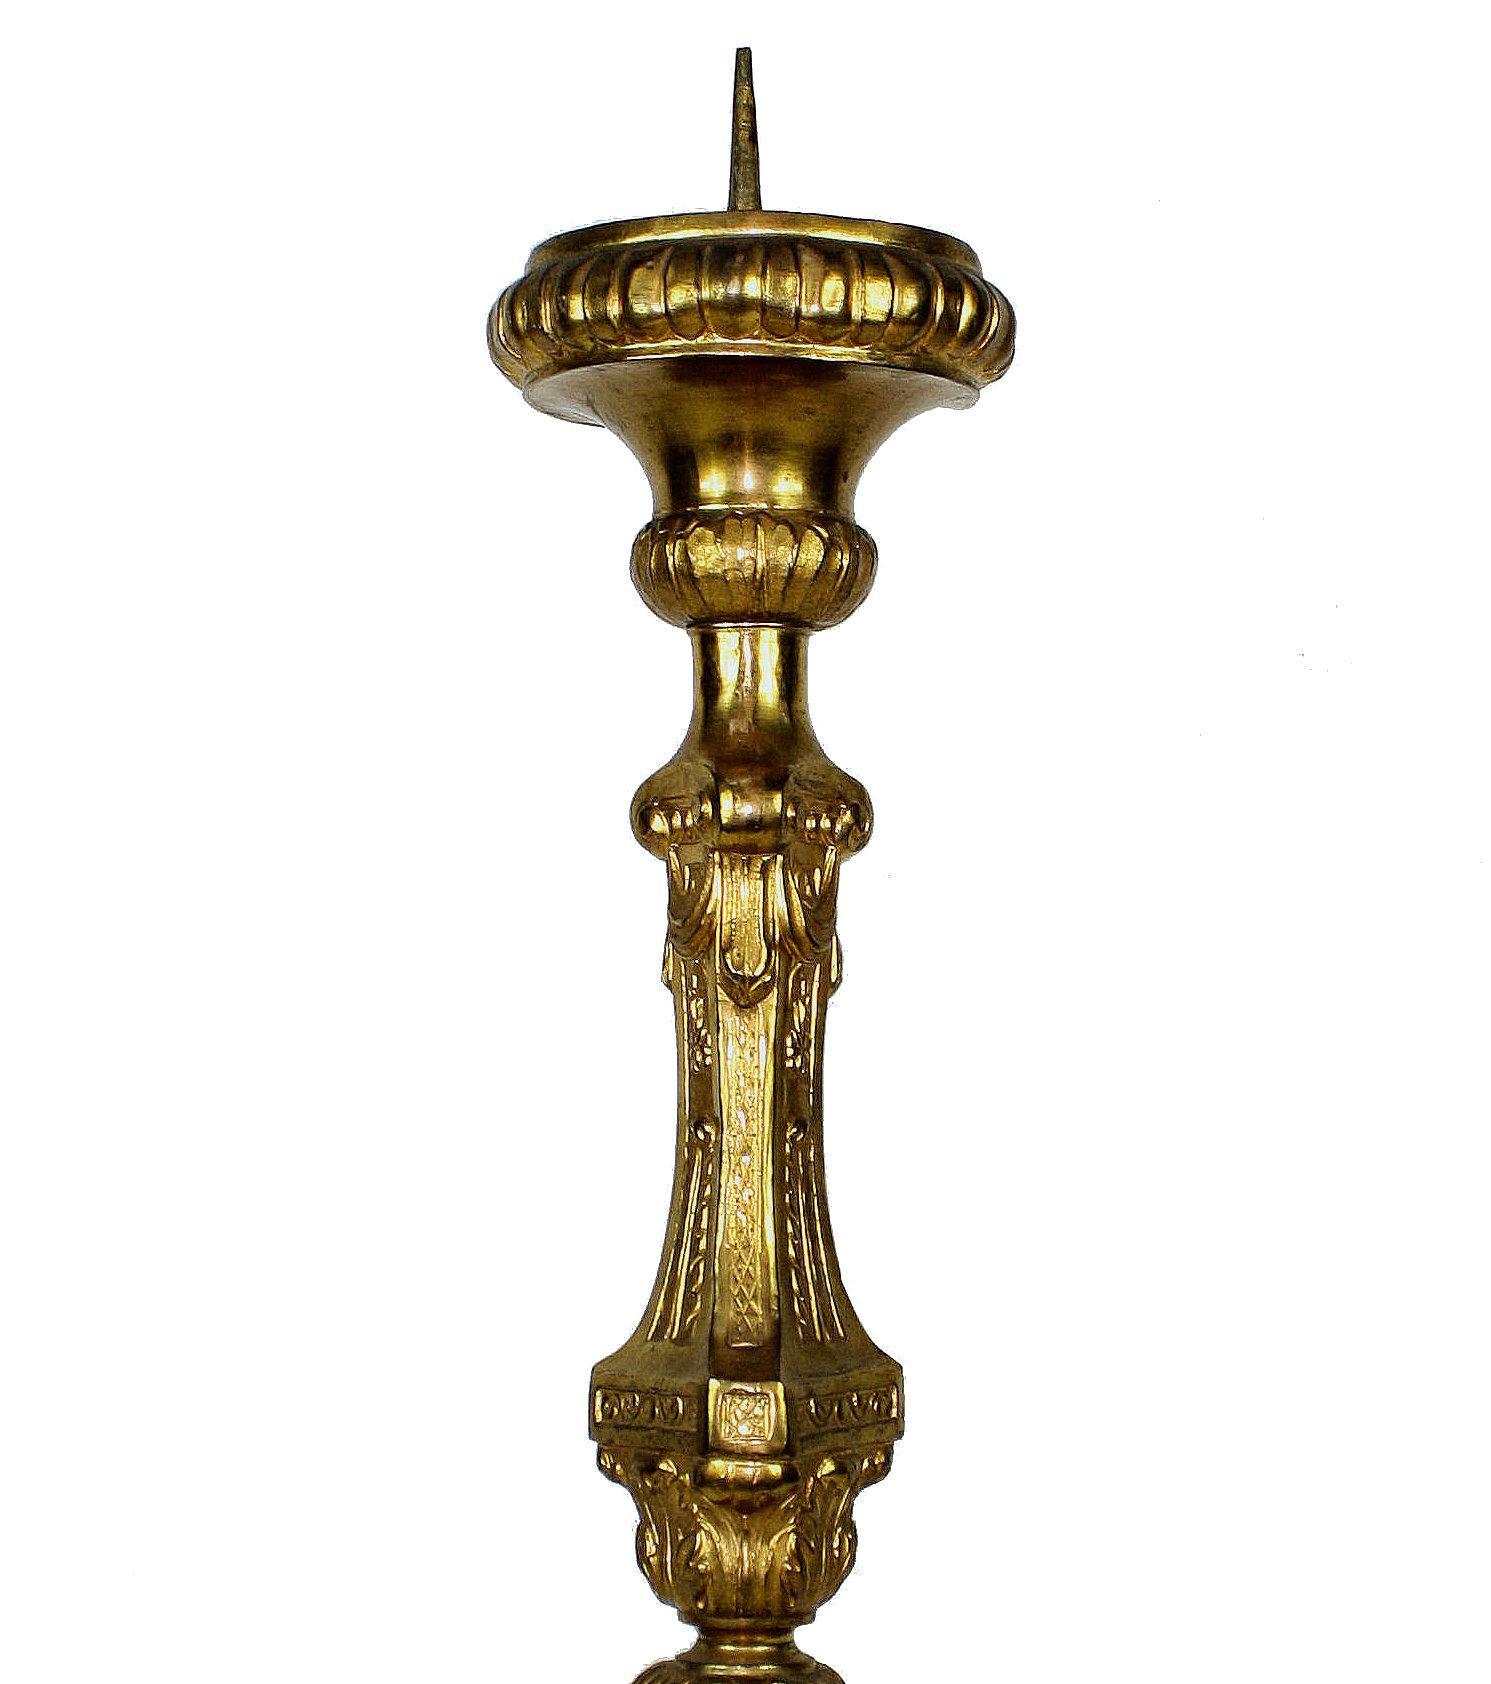 A French Baroque gold-plated brass pricket candlestick, beautifully burnished.